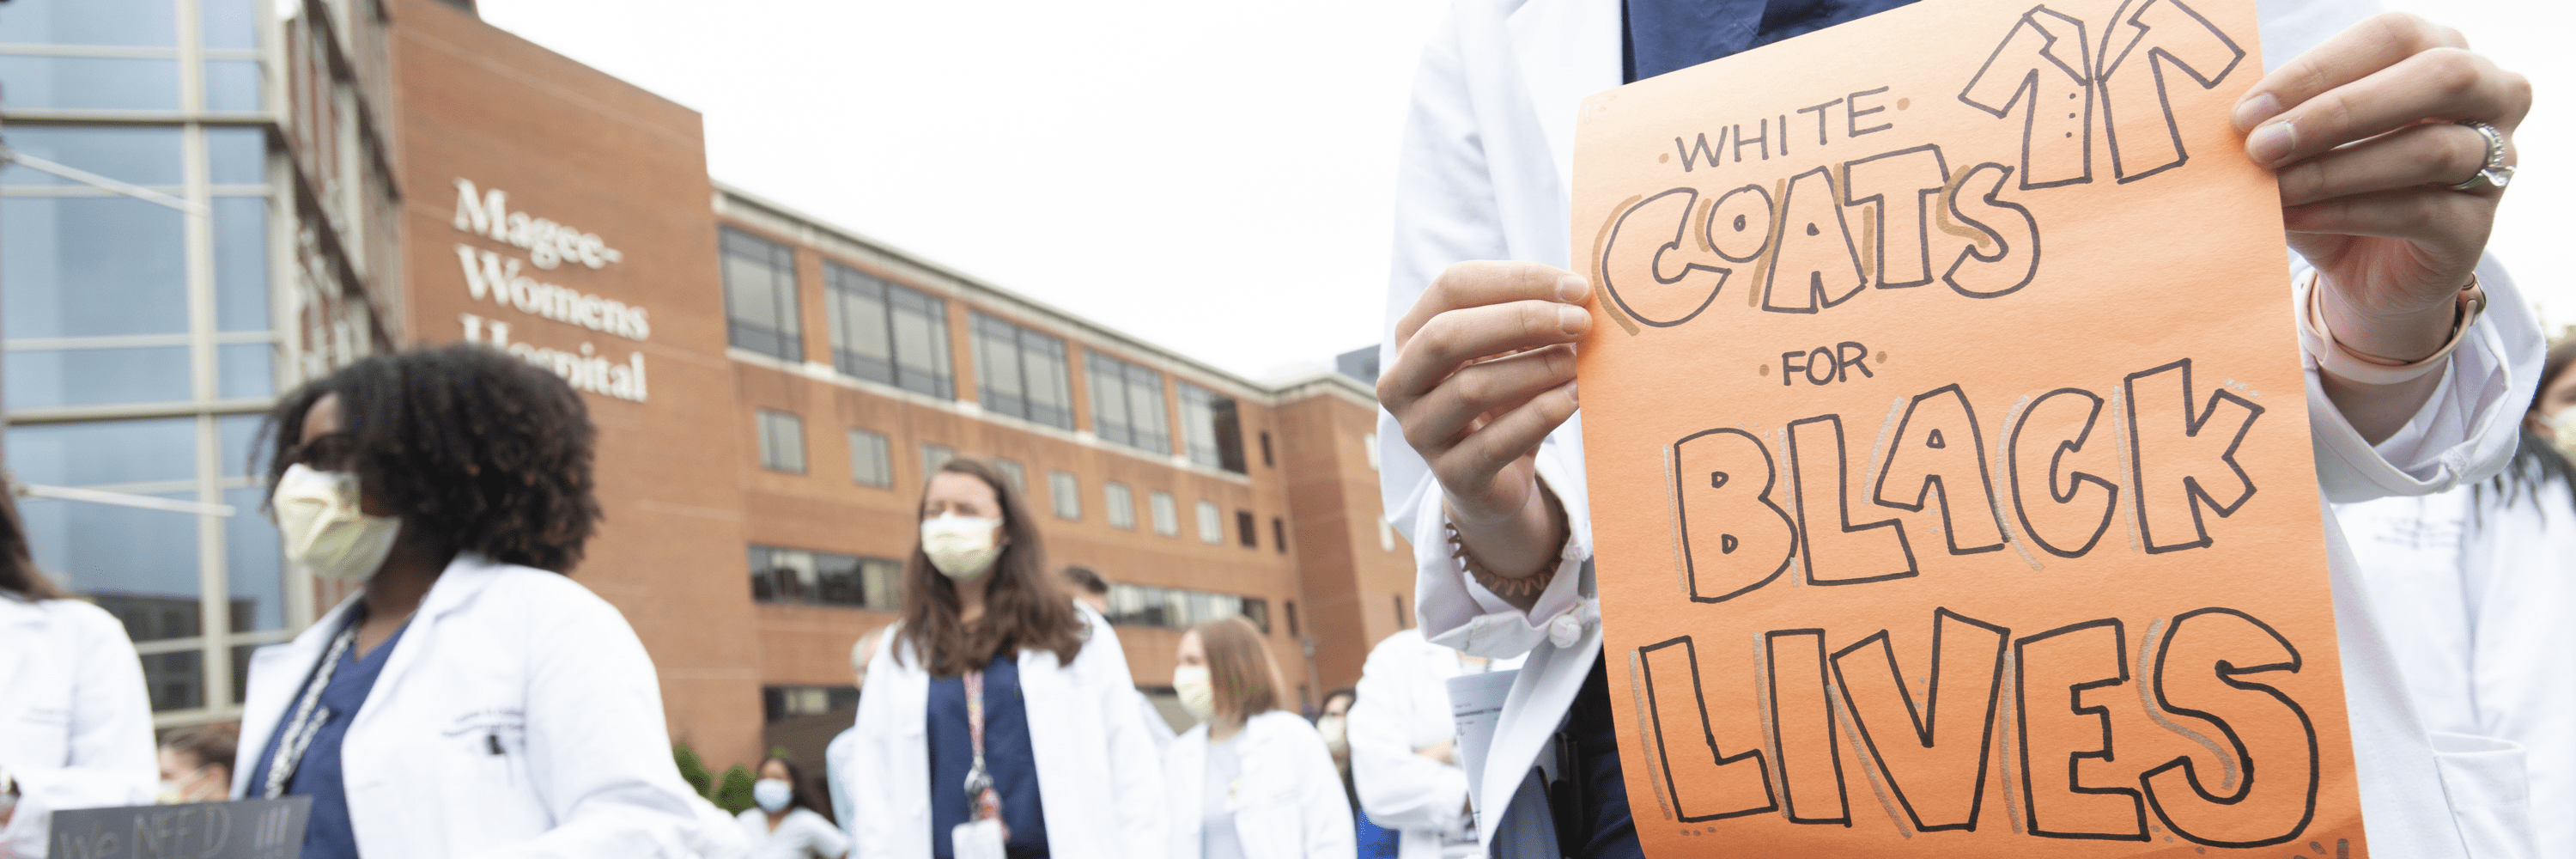 Doctors gather with signs and protest for Black Lives Matter outside Magee-Women's Hospital.